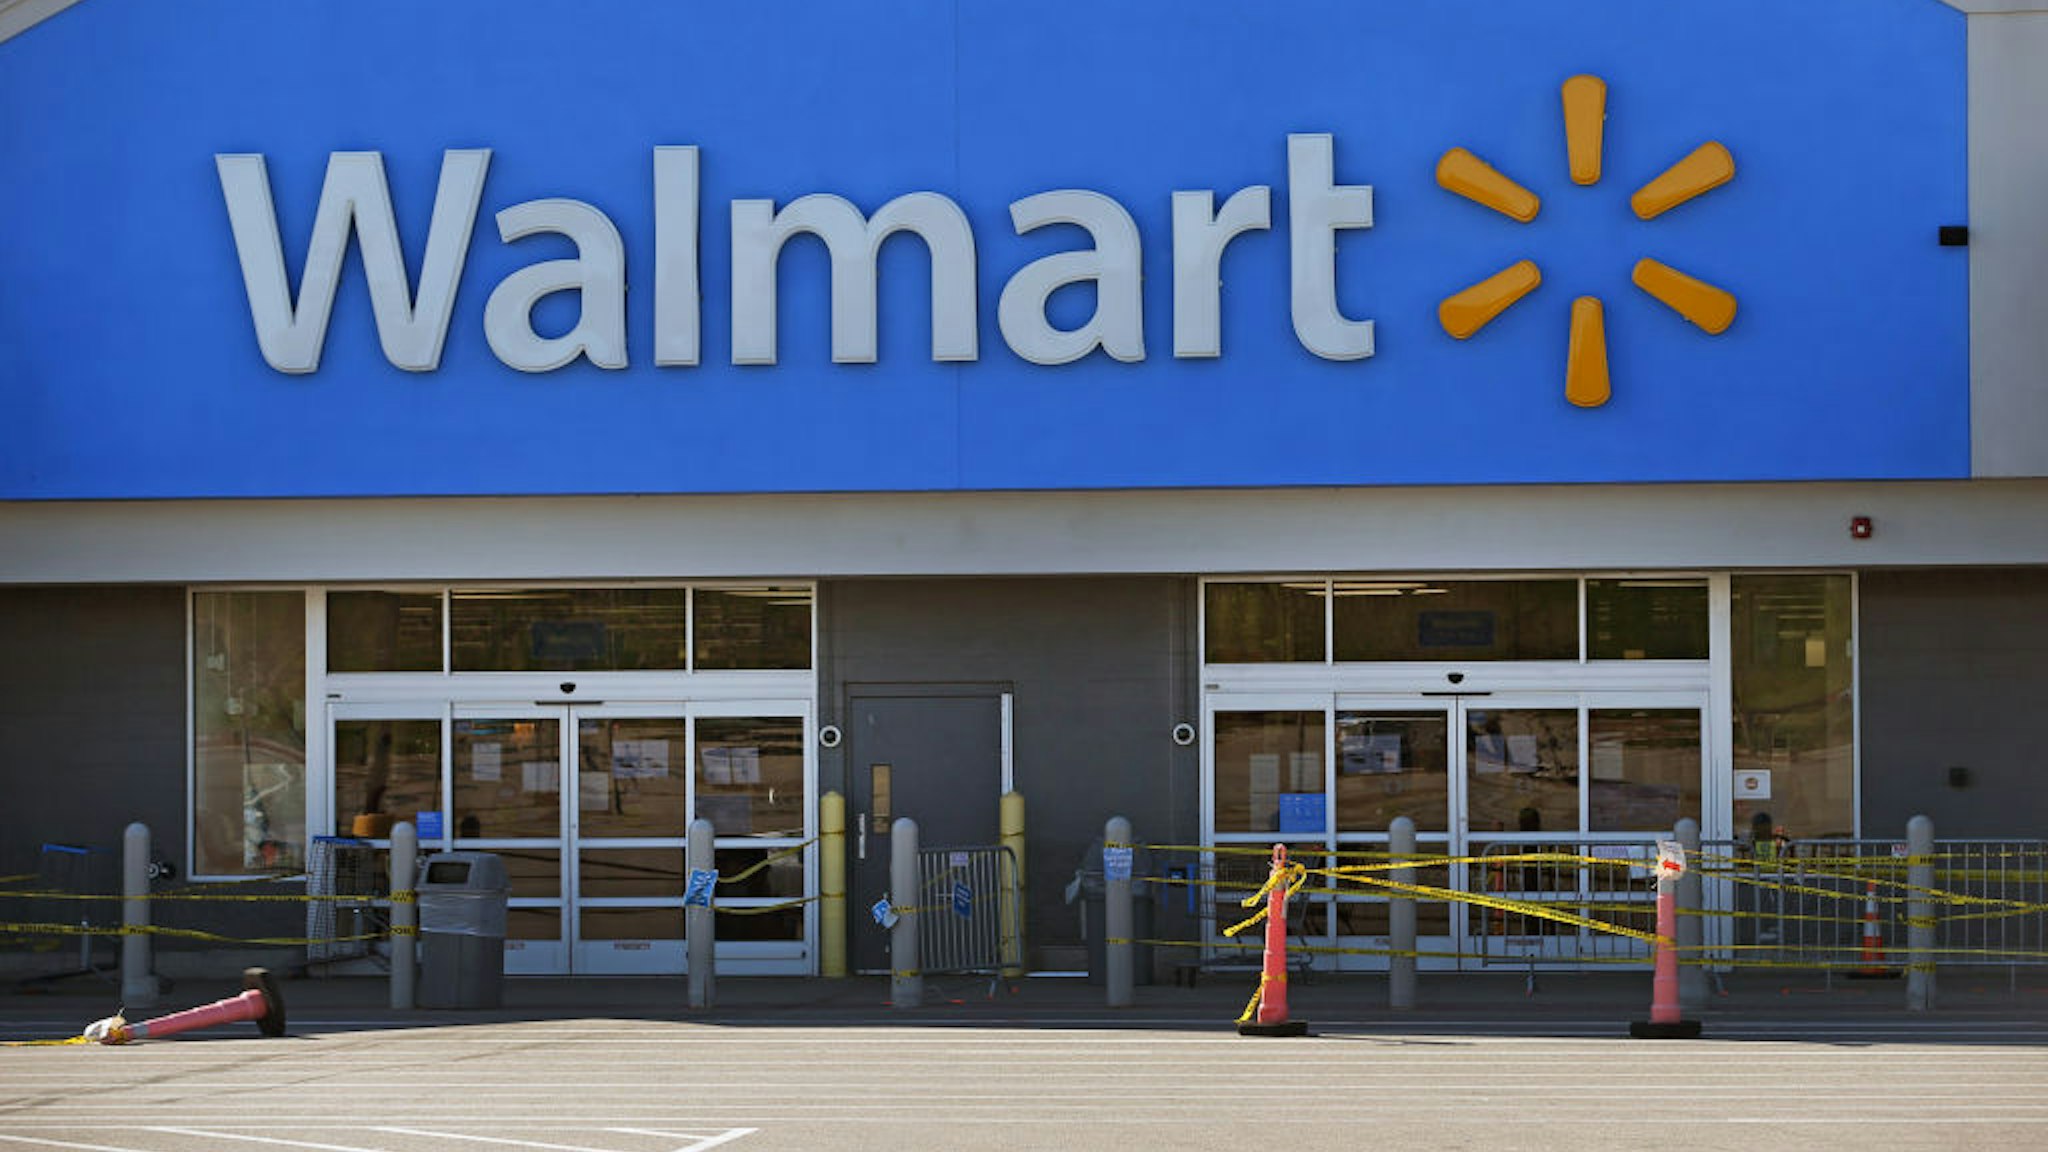 A Walmart store in Quincy, MA, pictured on May 5, 2020, has now closed after a worker died due to COVID-19.